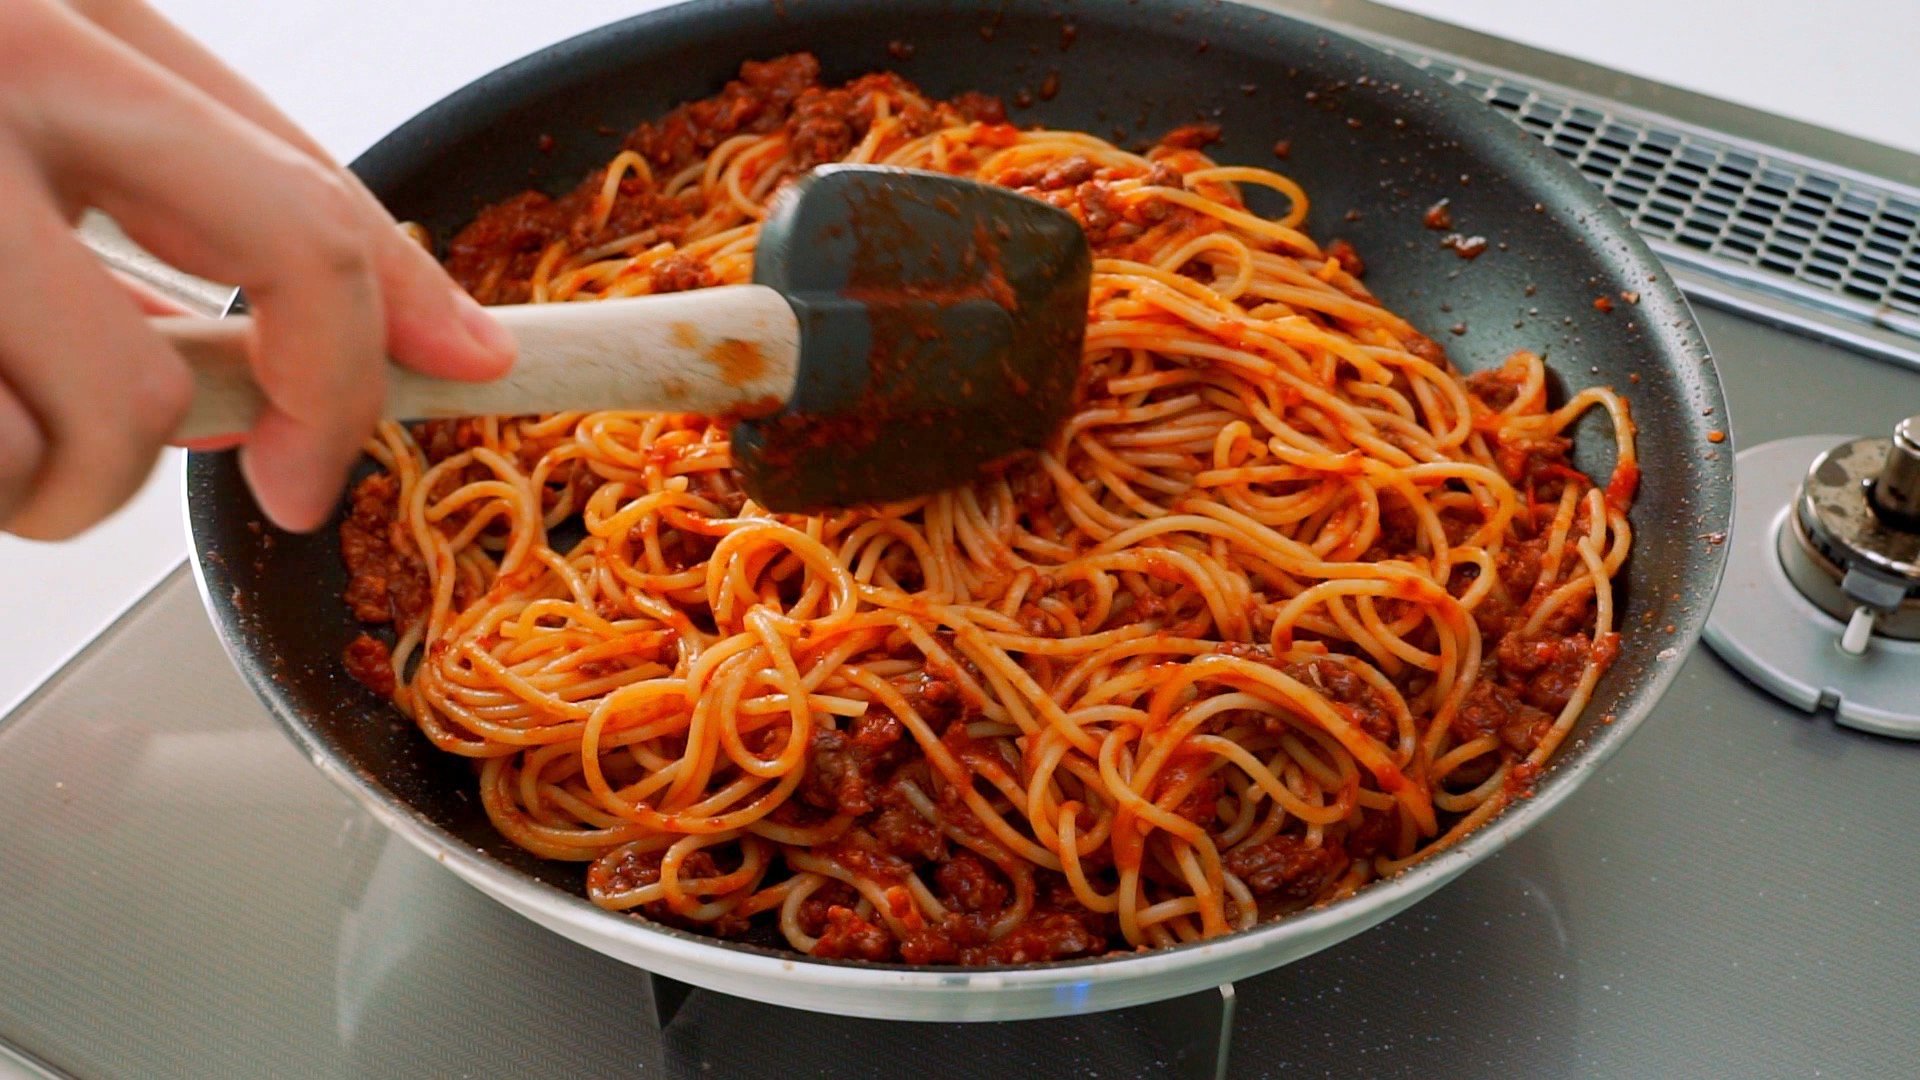 Meat sauced tossed together with boiled spaghetti noodles.r